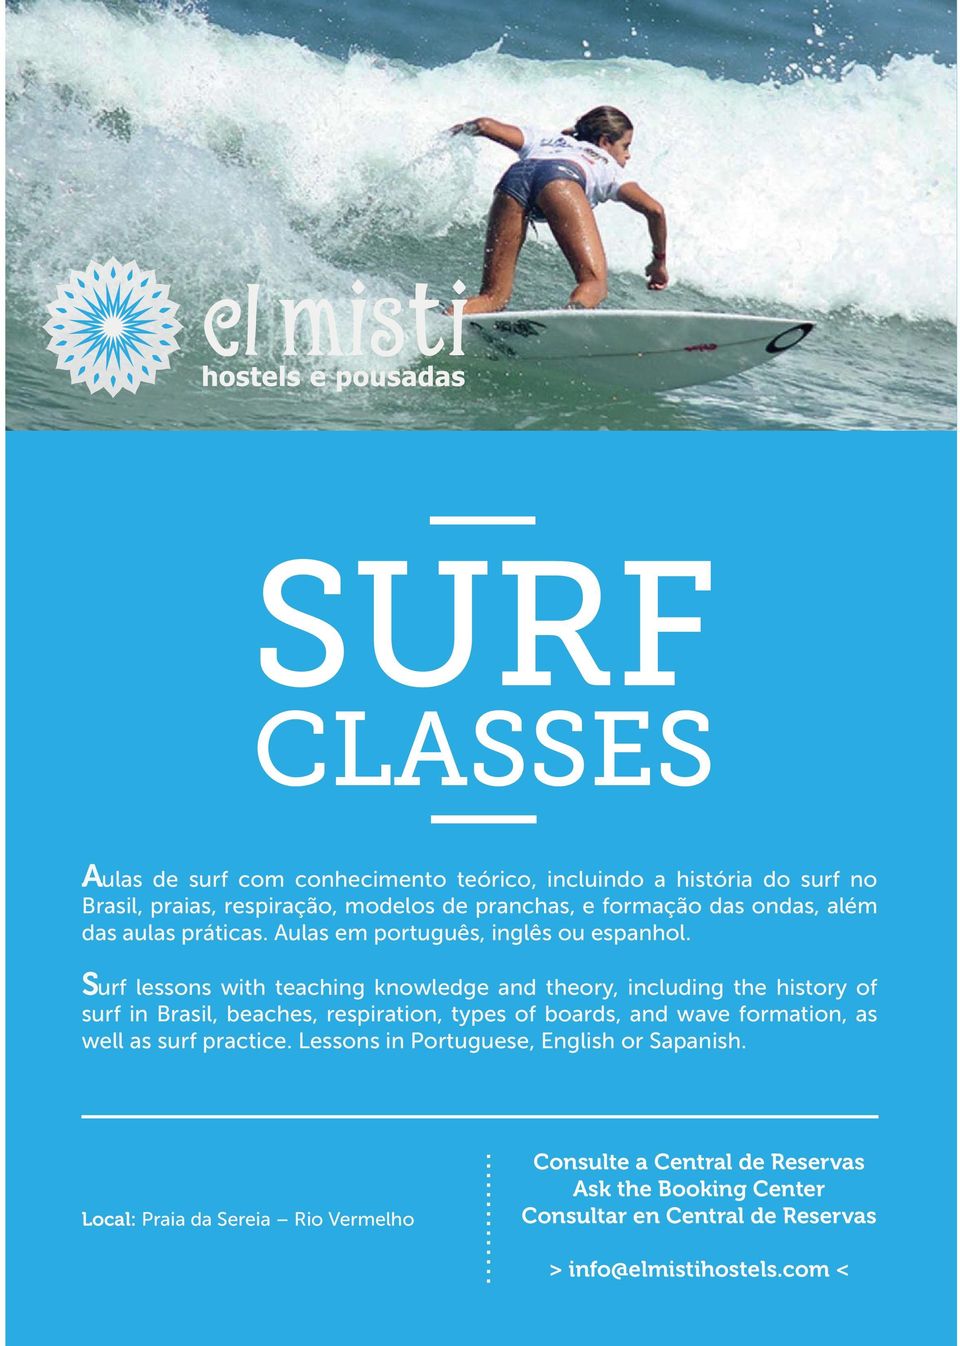 Surf lessons with teaching knowledge and theory, including the history of surf in Brasil, beaches, respiration, types